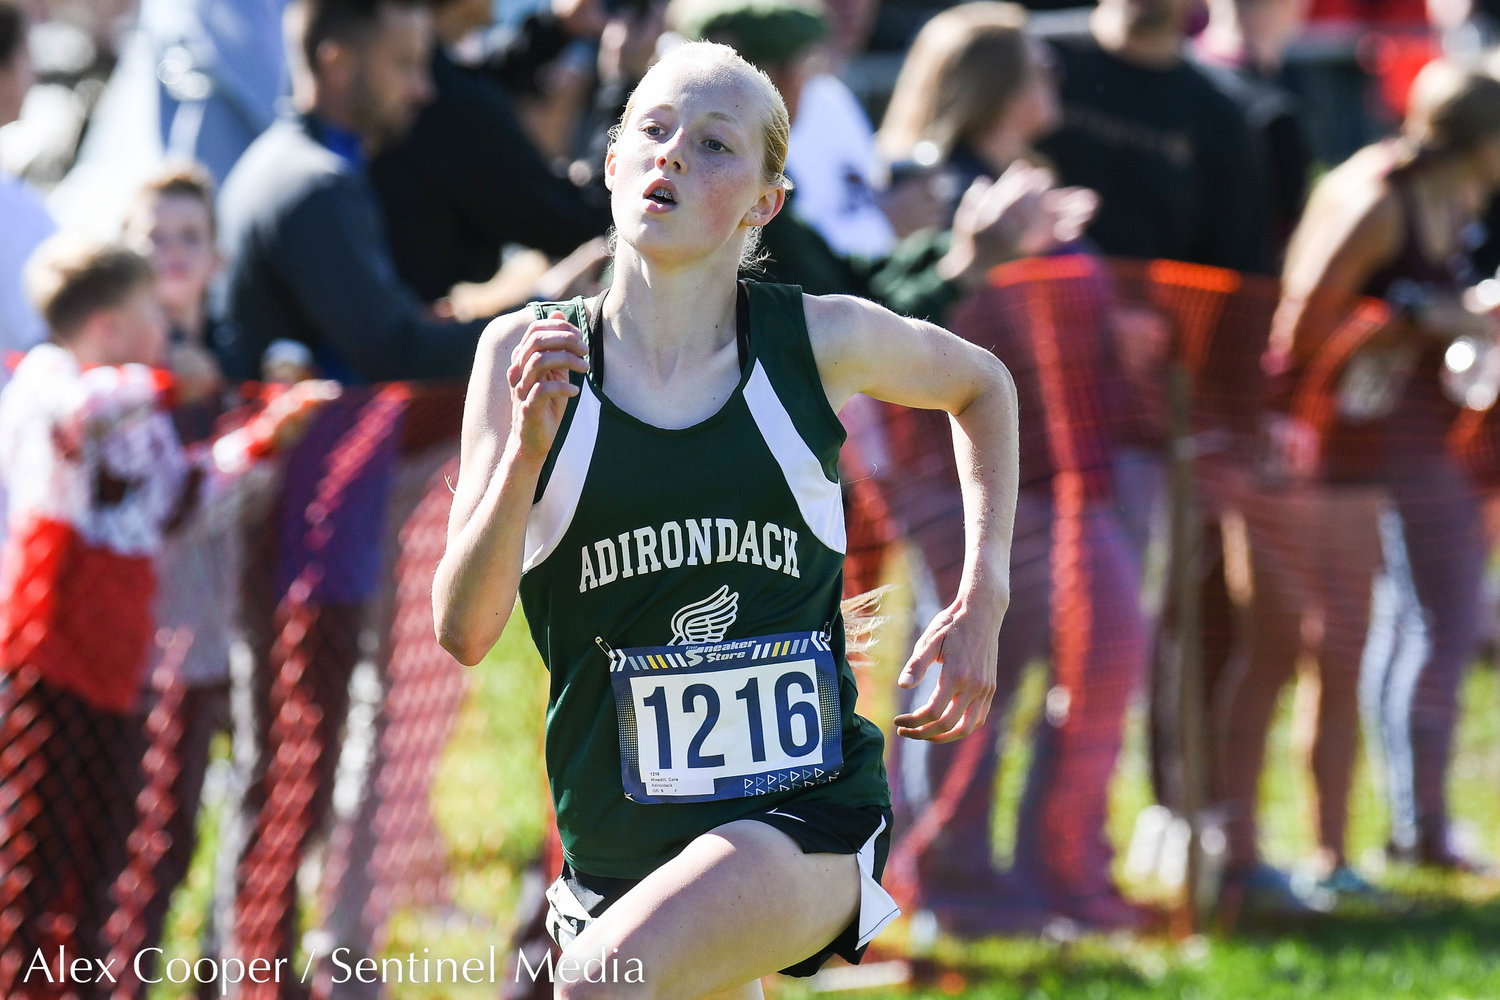 Adirondack runner Cora Hinsdill places first during the 79th EJ Herrmann XC Invitational on Saturday, Sept. 24 at Proctor Park in Utica.